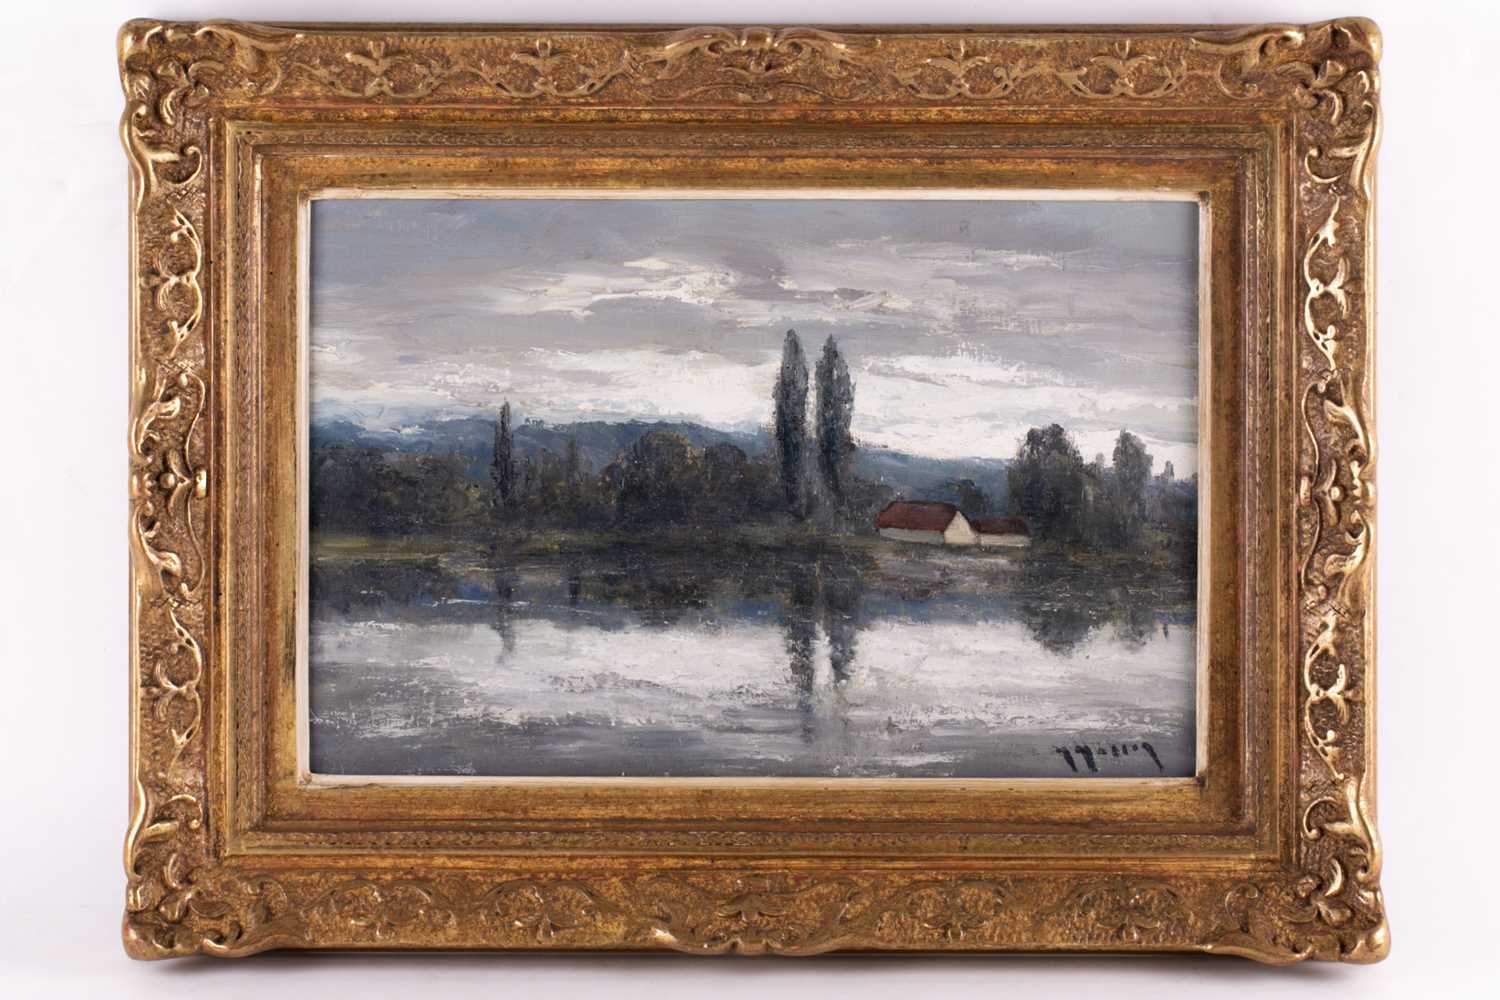 Marcel Masson (1911-1988), a cottage and lake scene, signed to lower right corner, oil on canvas, 26